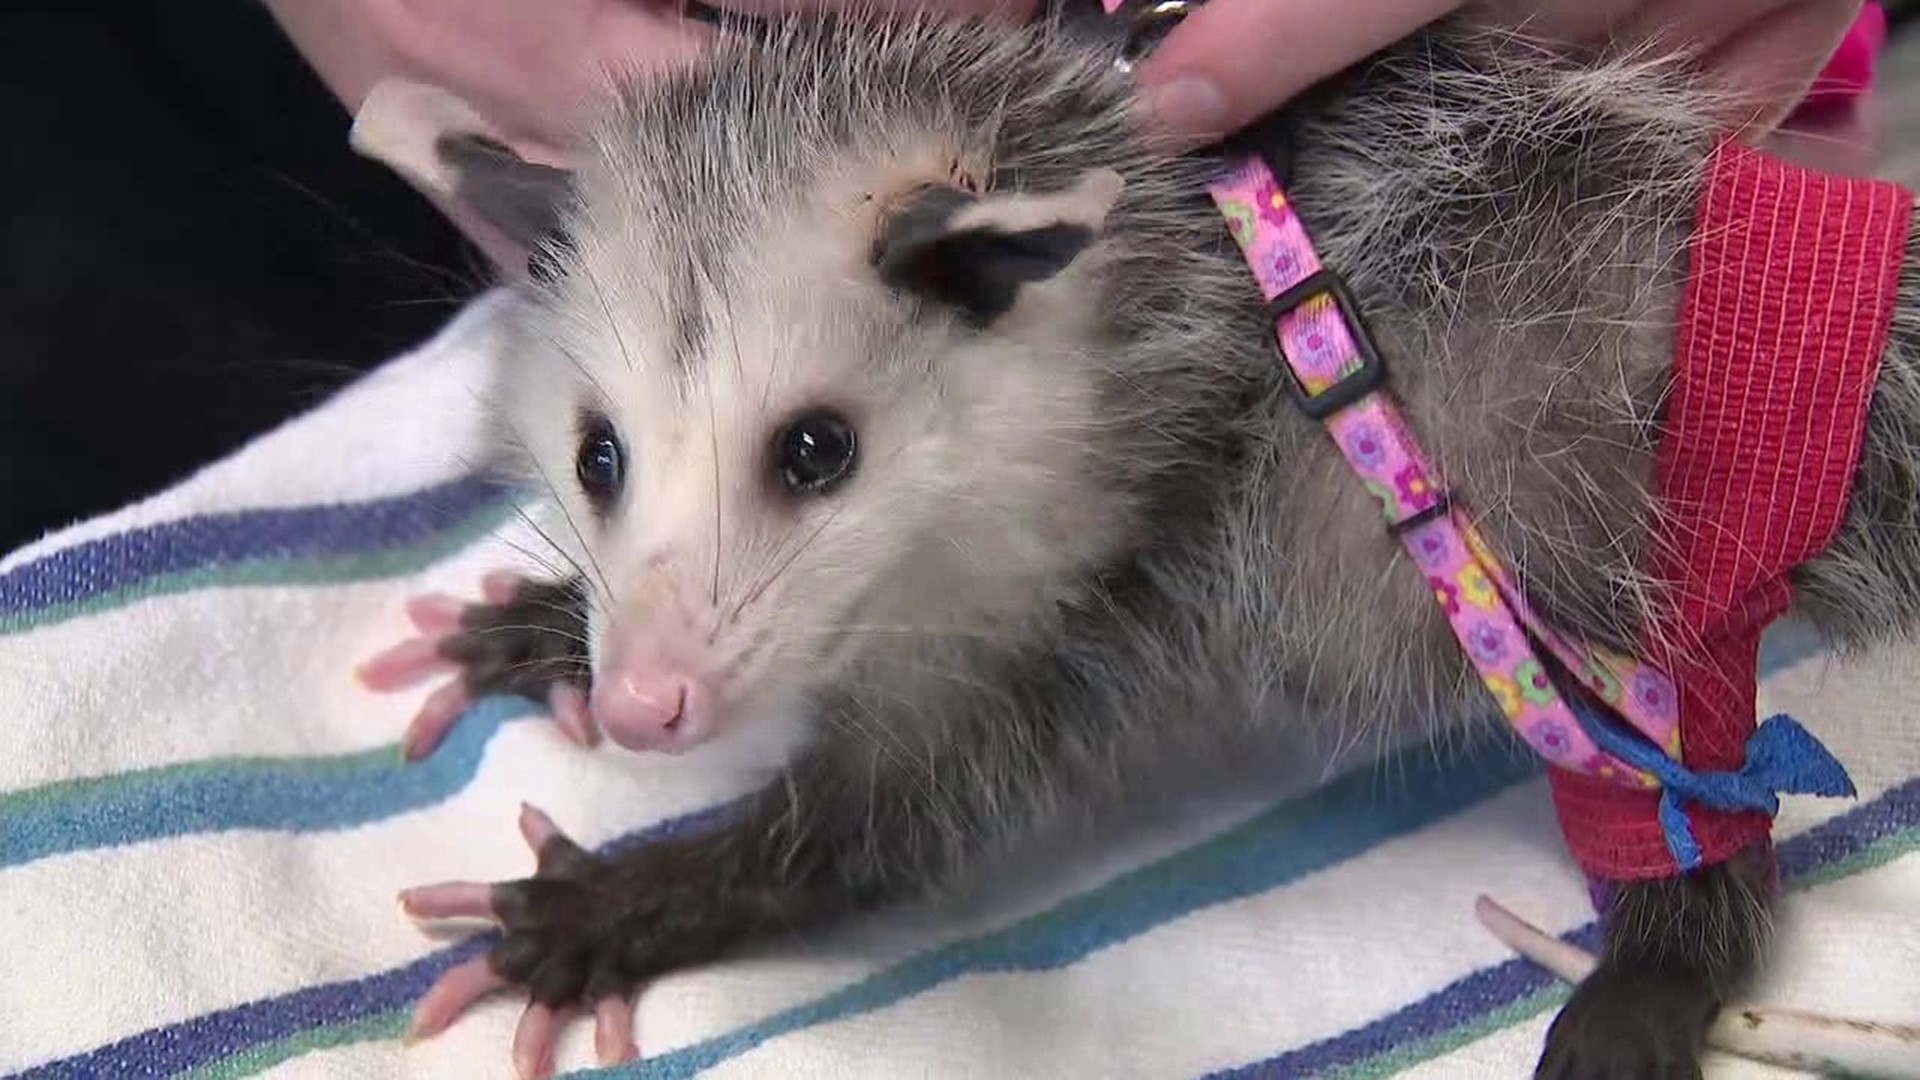 Rehabilitators at The Wilderz at Pocono Wildlife Center near Stroudsburg are helping an opossum named Daisy get back to the wild.